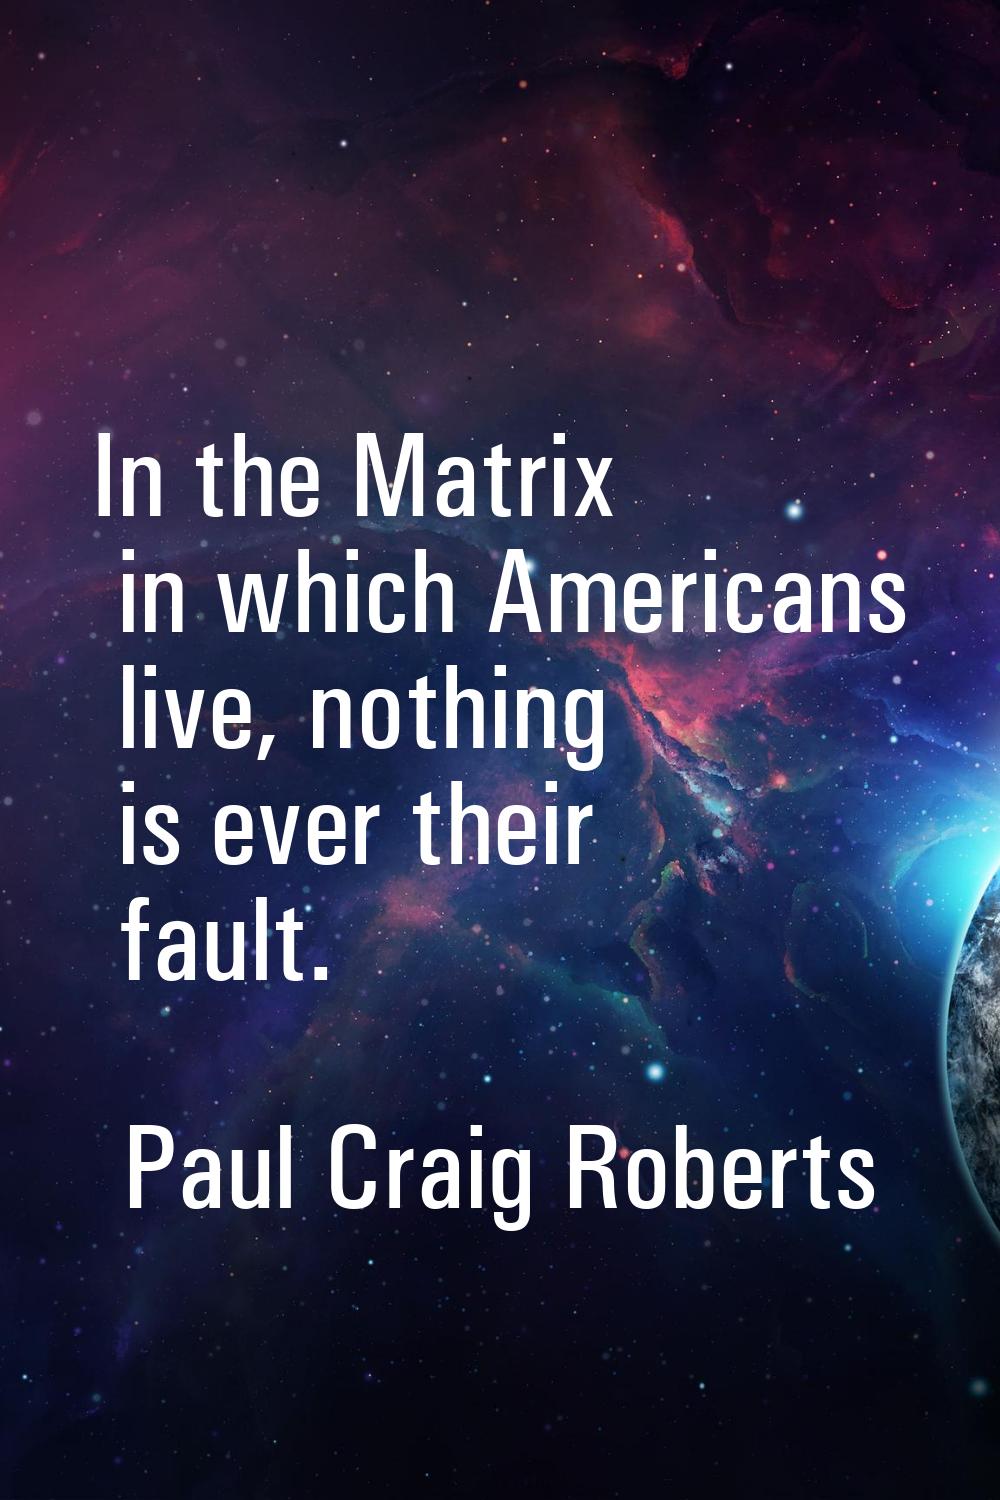 In the Matrix in which Americans live, nothing is ever their fault.